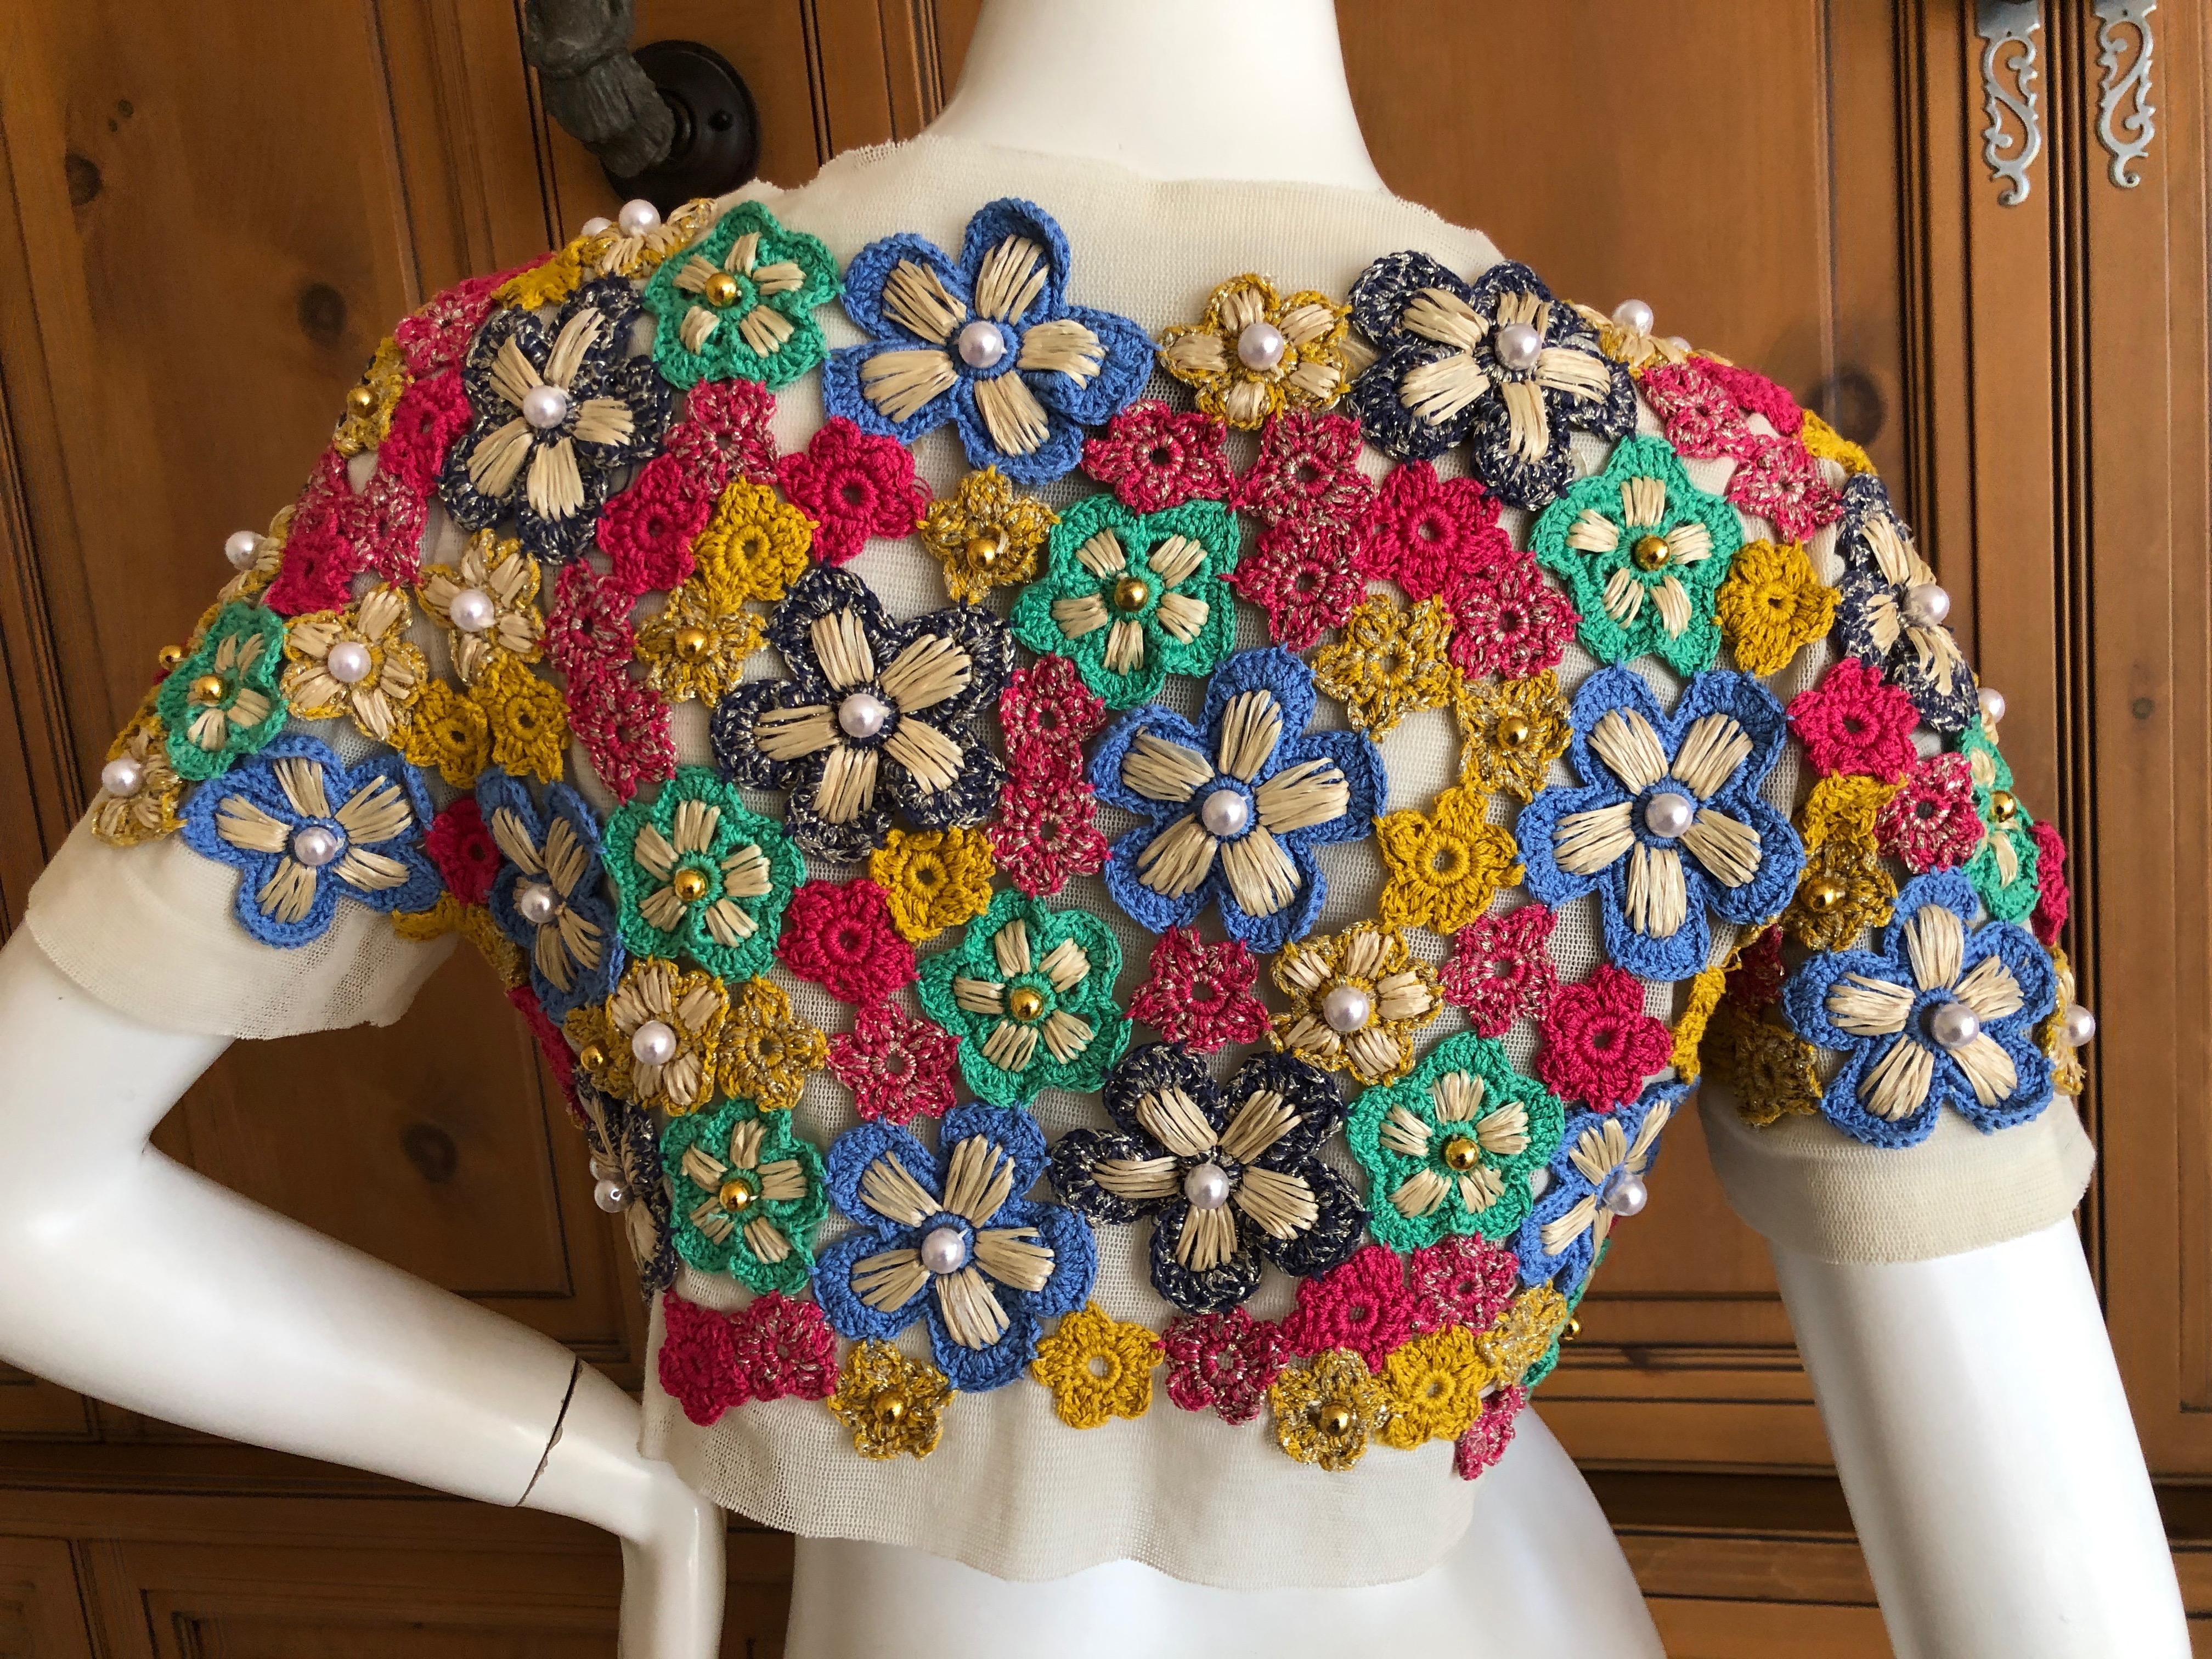 Moschino Hippy Chick Crochet Embellished Shrug for Cheap & Chic For Sale 2